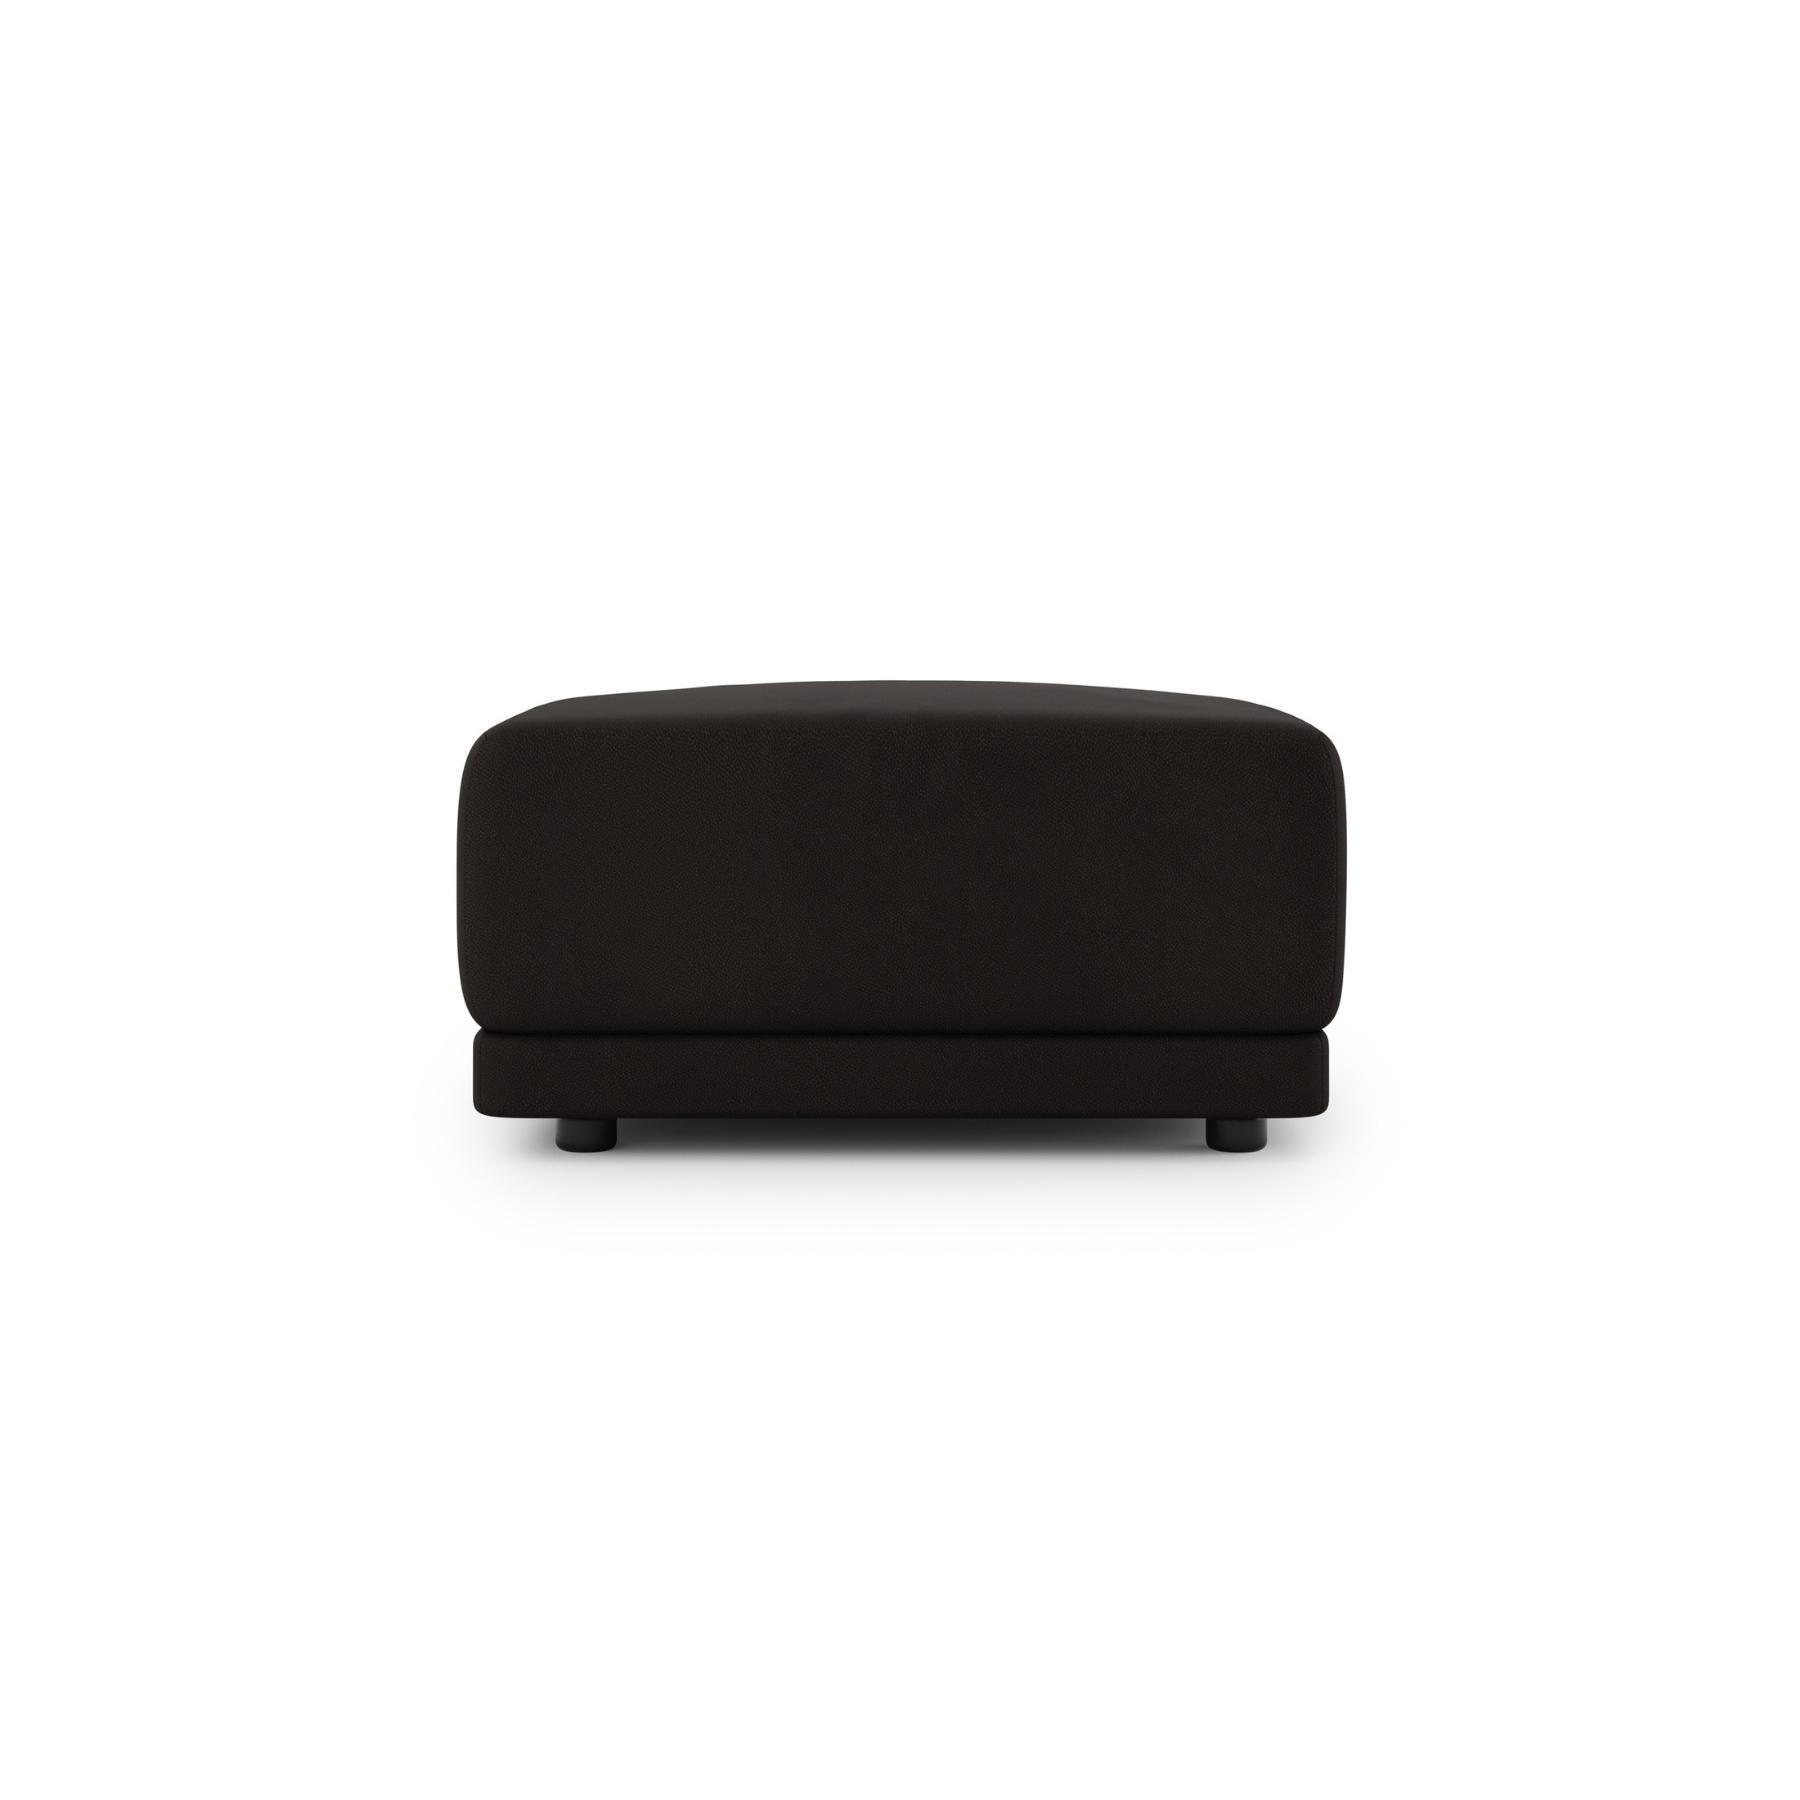 Kelston Ottoman | Leather - THAT COOL LIVING